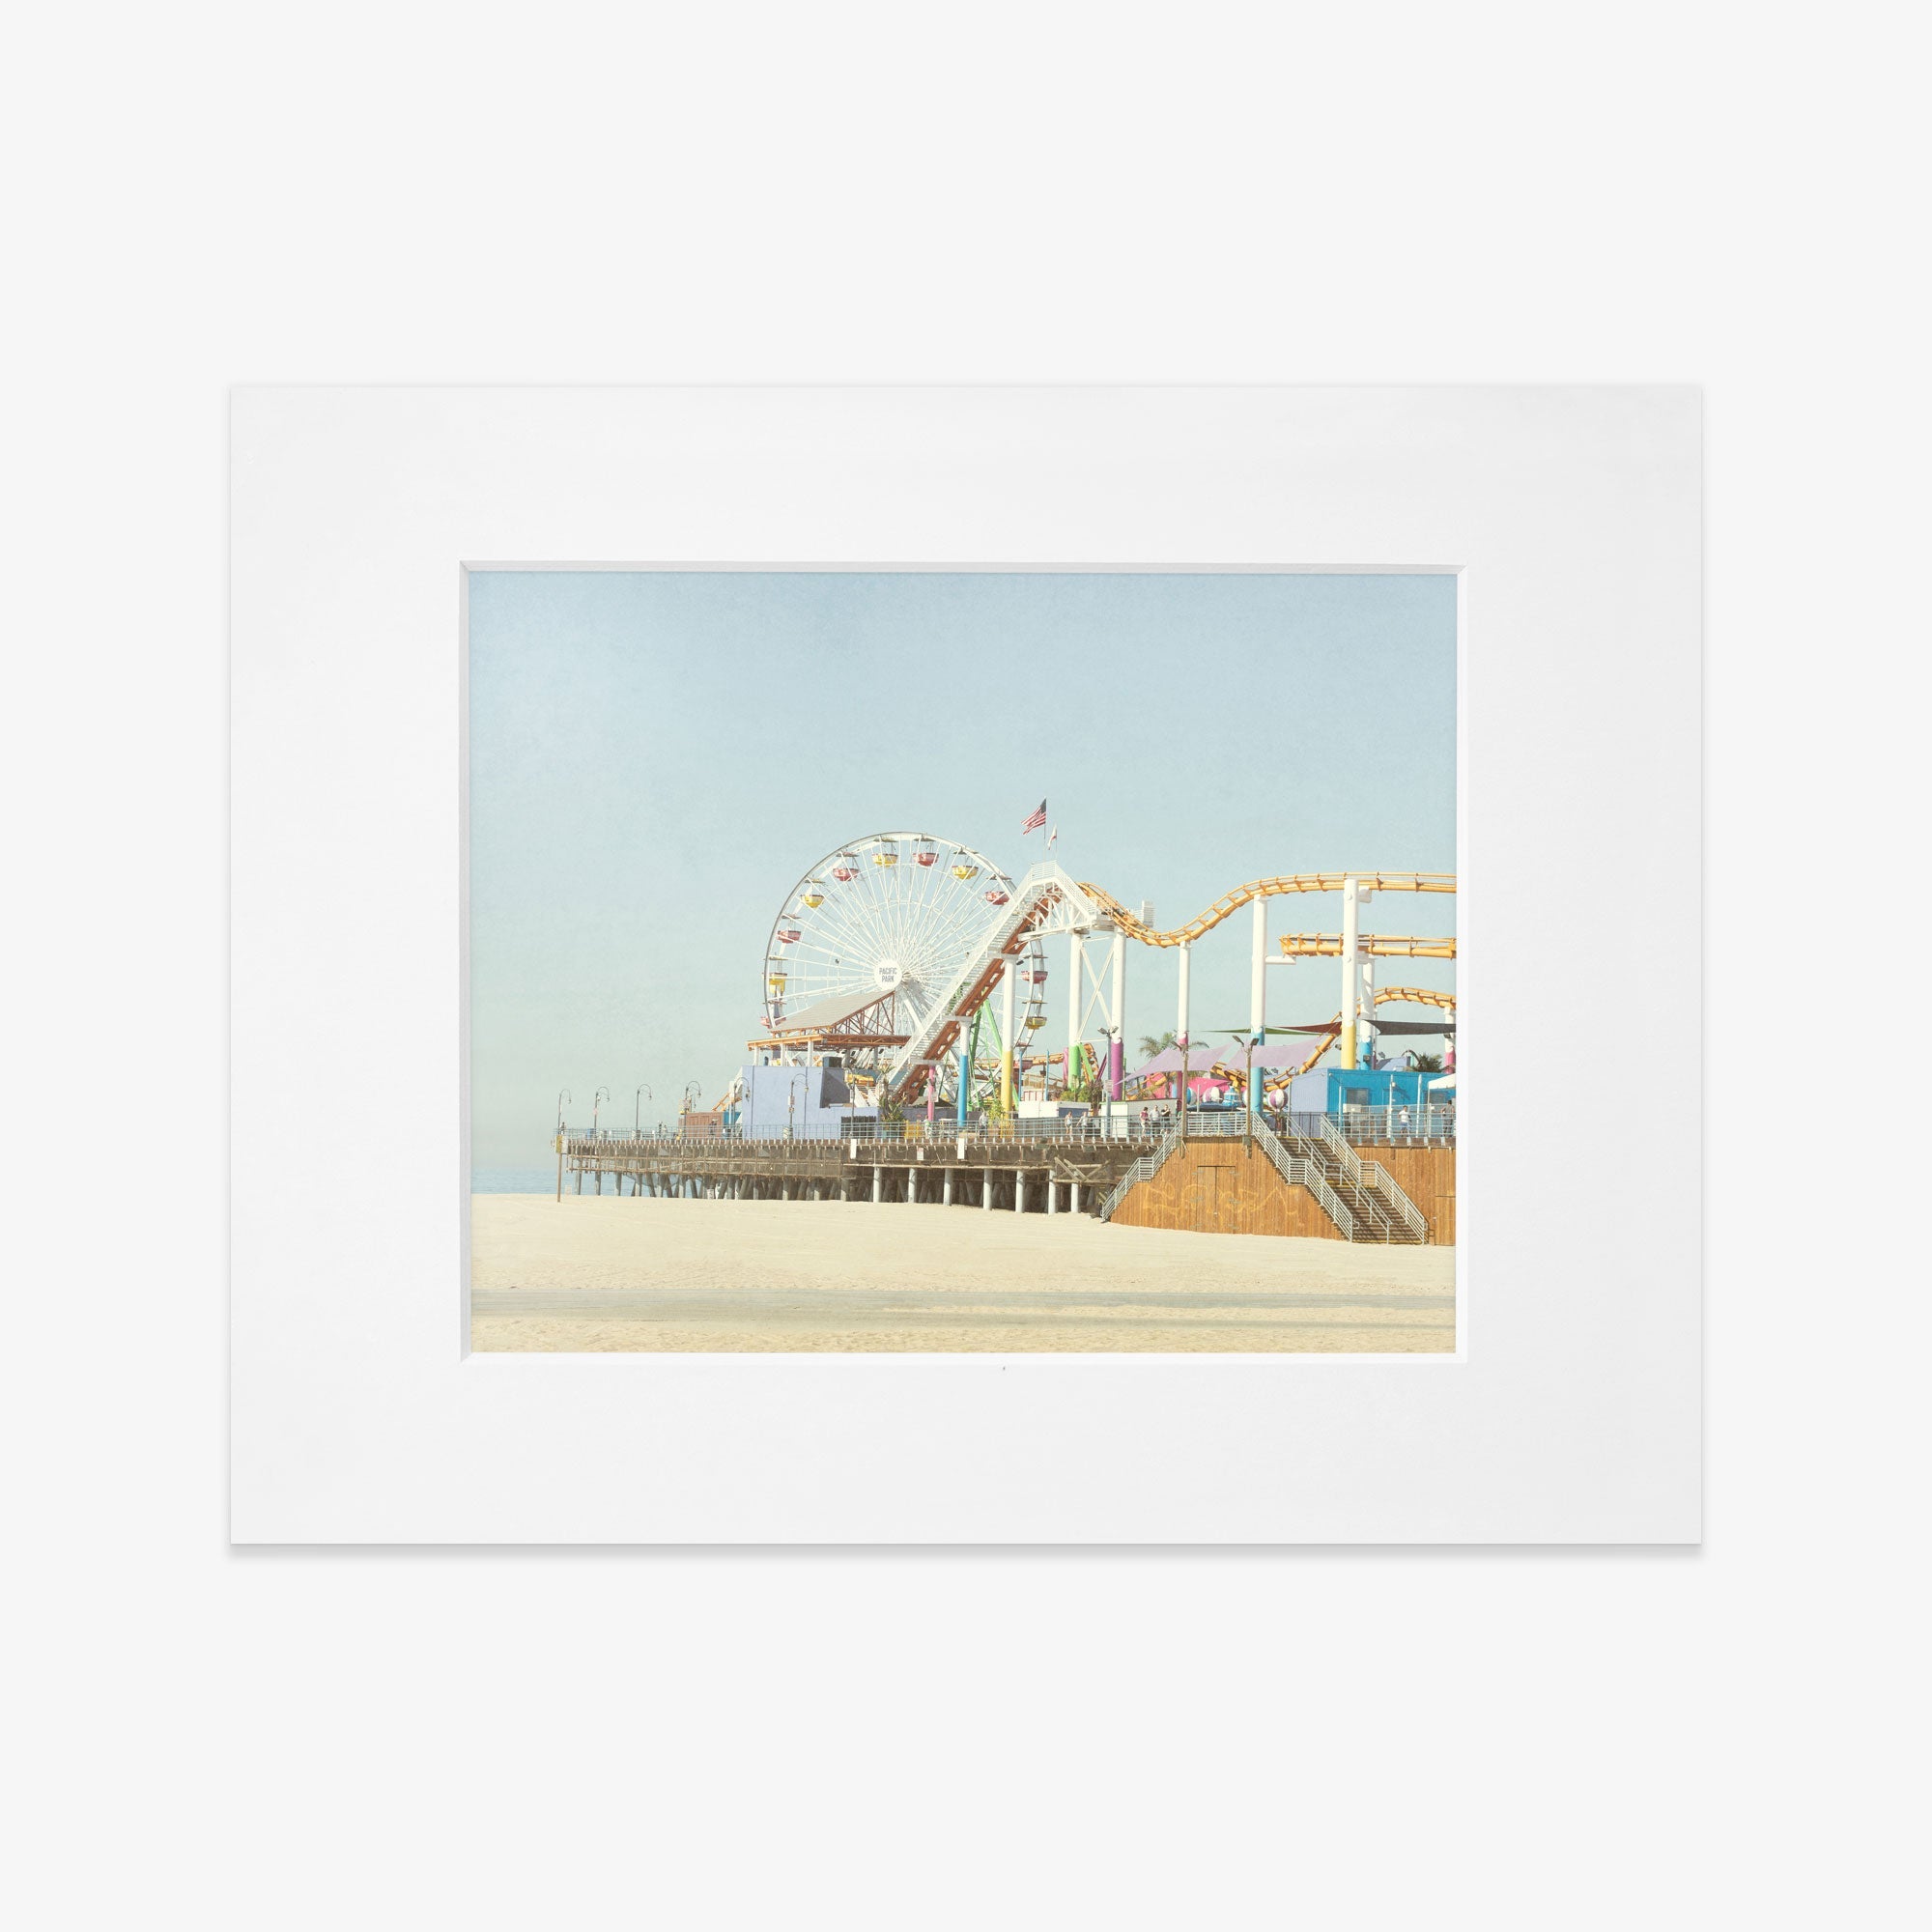 A framed California Print, &#39;Santa Monica Pier&#39; by Offley Green, depicting a vibrant seaside amusement park with a ferris wheel and roller coaster at Santa Monica Pier, displayed against a clear sky.